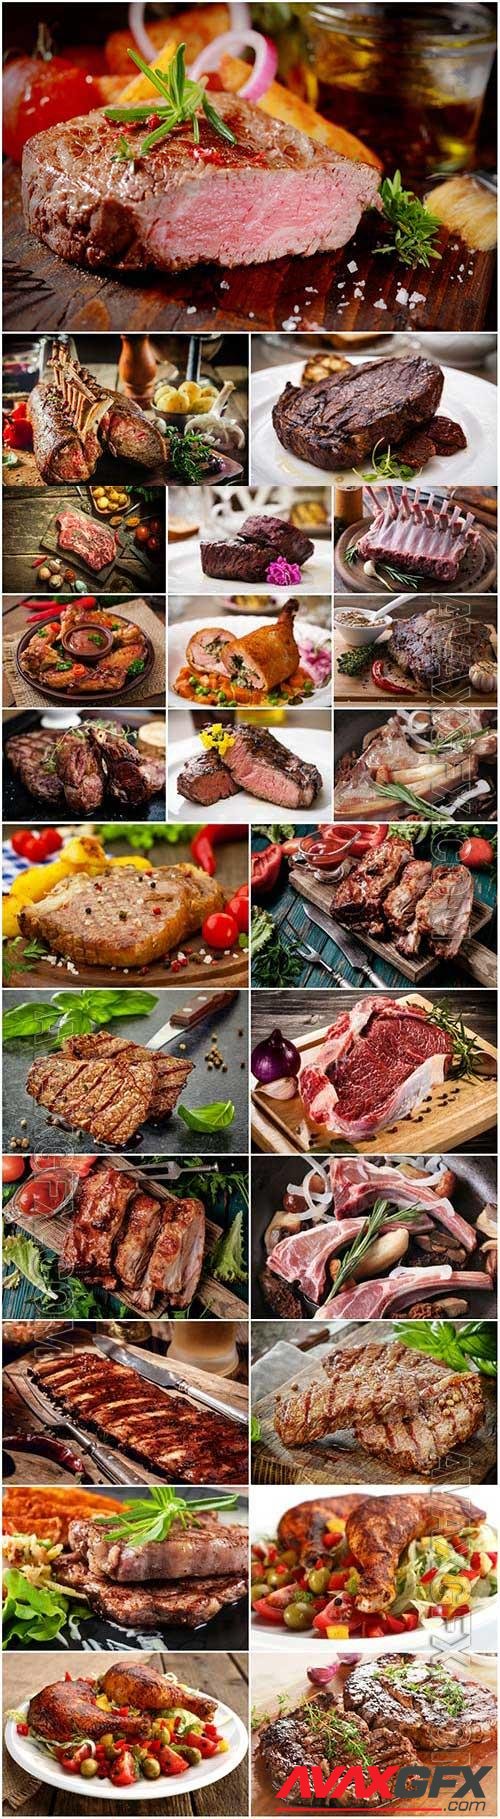 Grilled meat, fresh meat stock photo